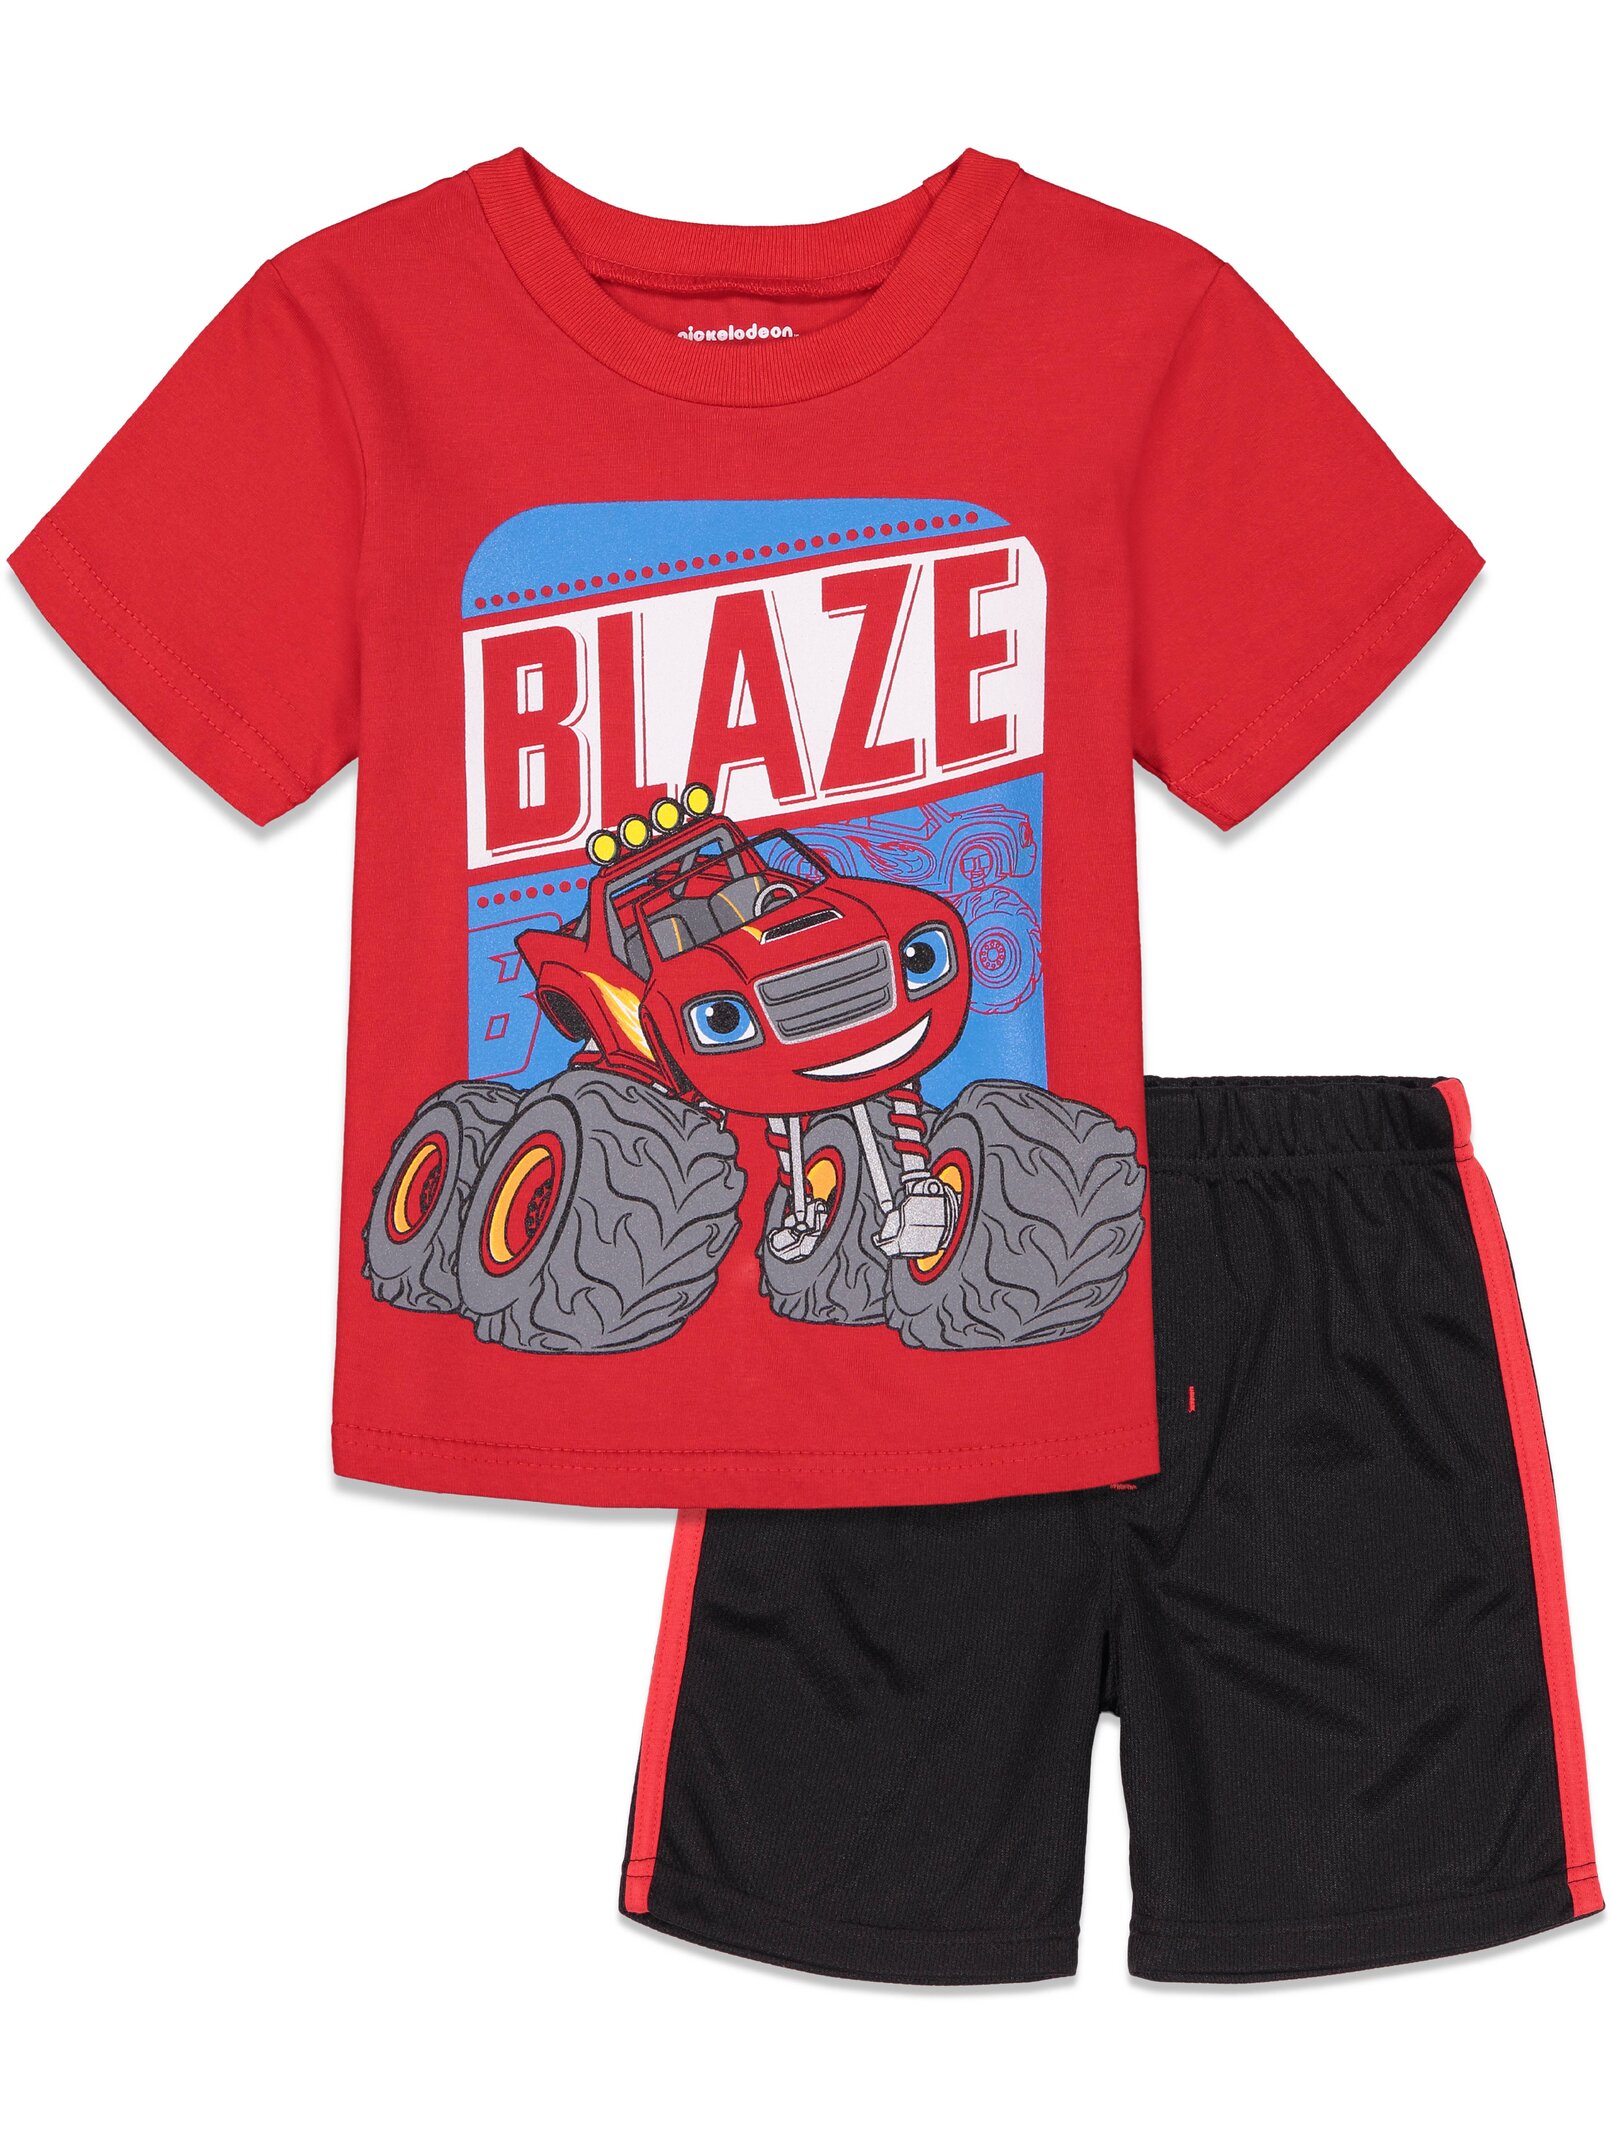 Blaze and the Monster Machines Little Boys Graphic T-Shirt Mesh Shorts Outfit Set Red / Black 6 - image 1 of 5